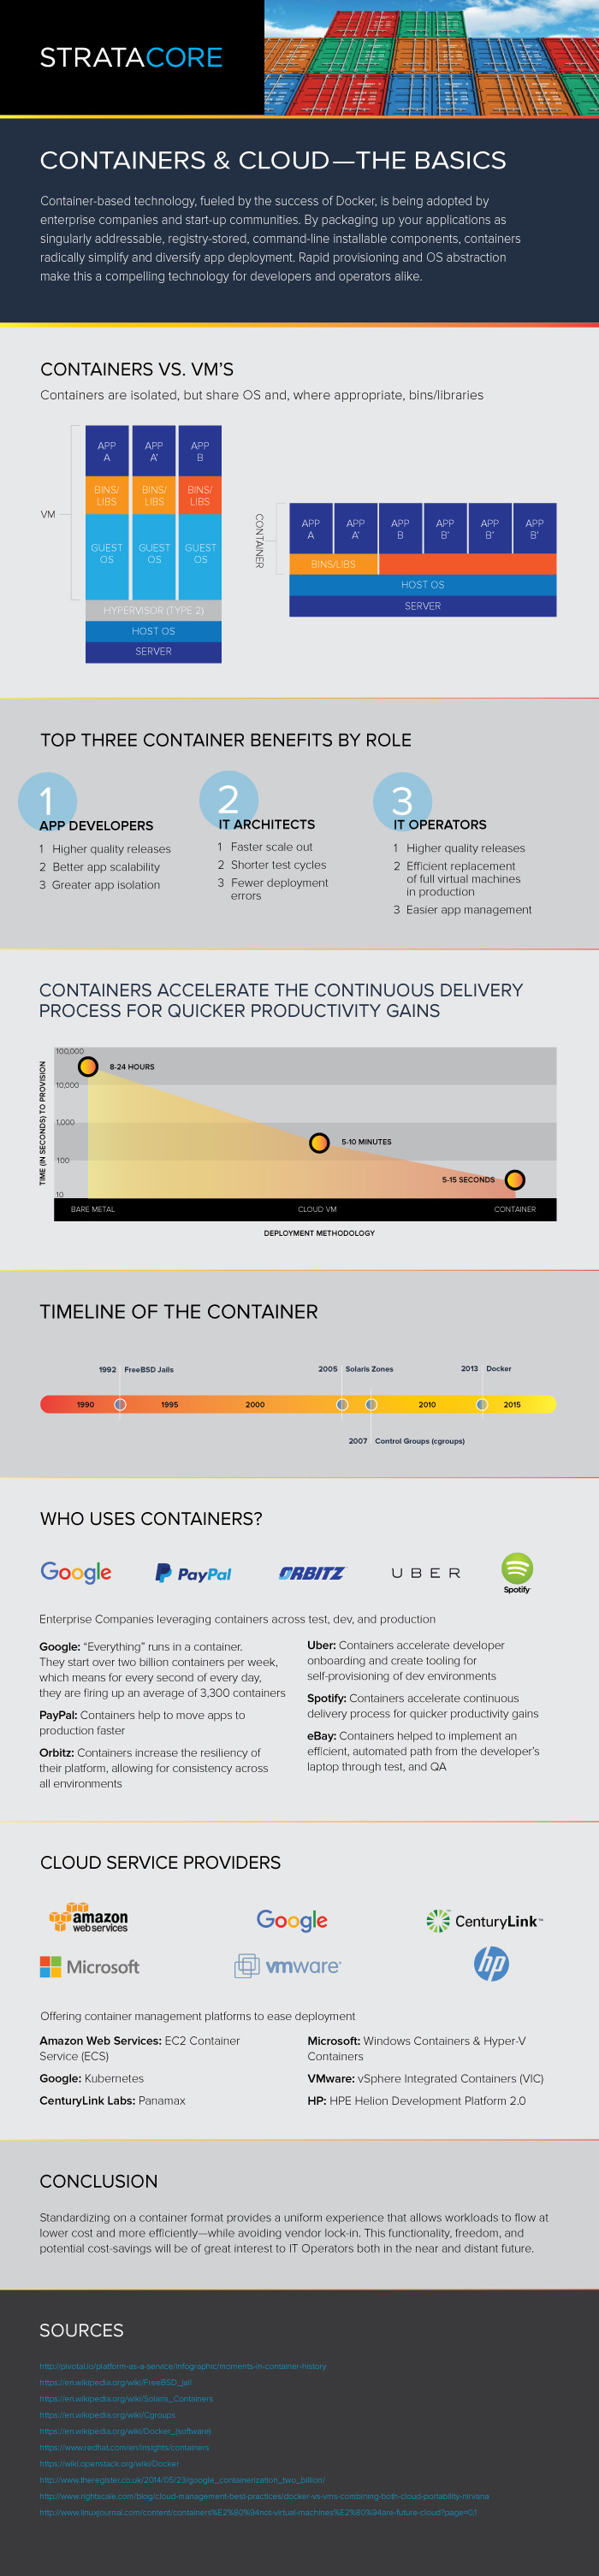 Container_Infographic_Image.jpg